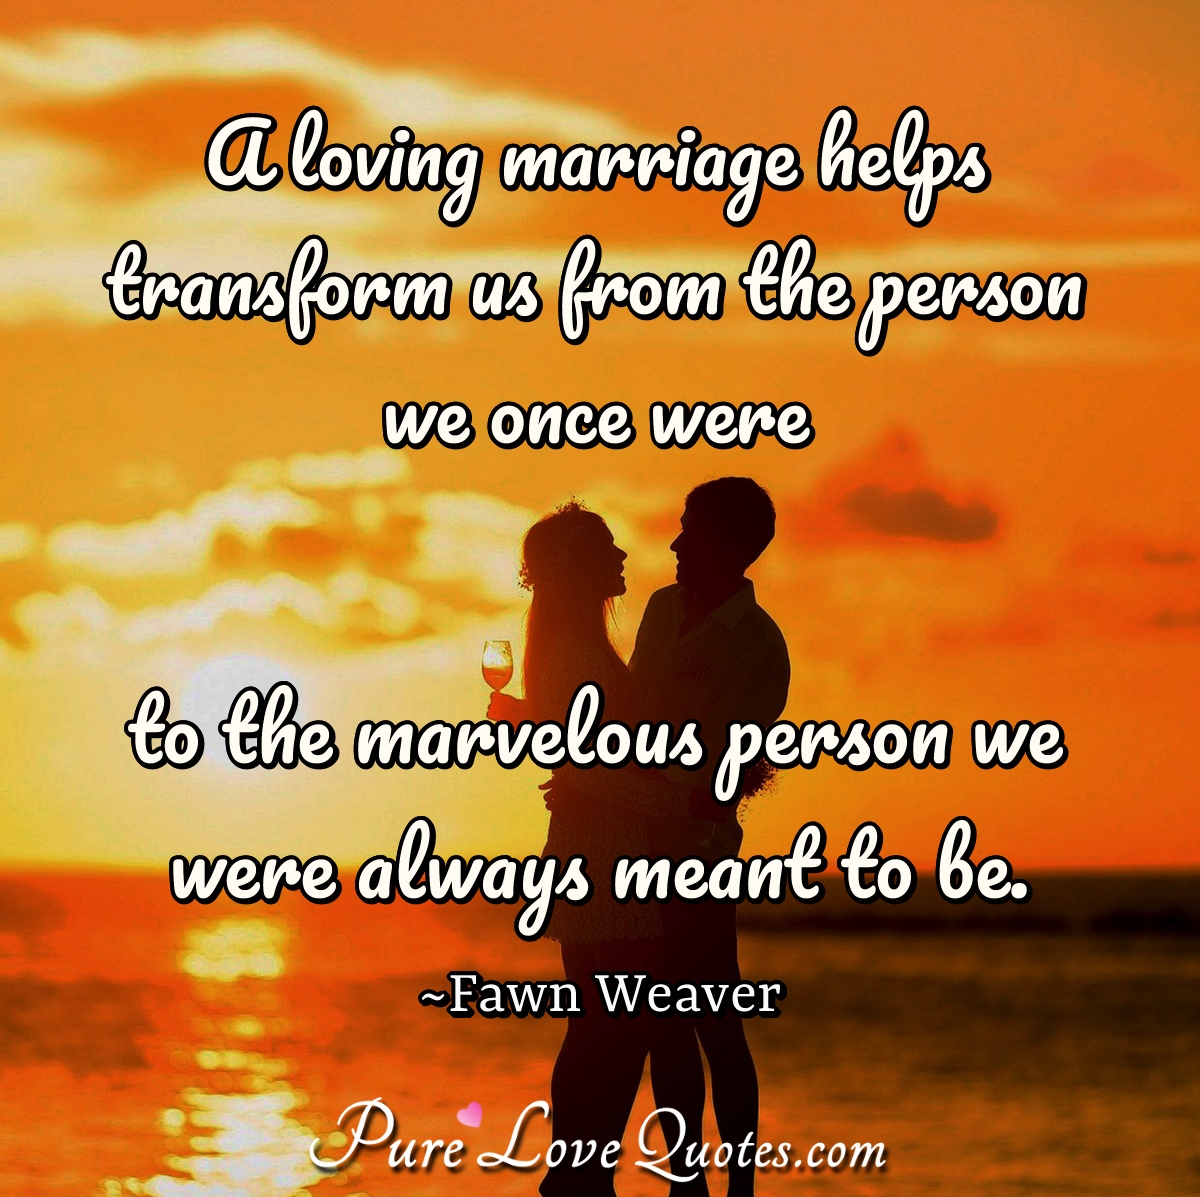 A loving marriage helps transform us from the person we once were to the marvelous person we were always meant to be. - Fawn Weaver